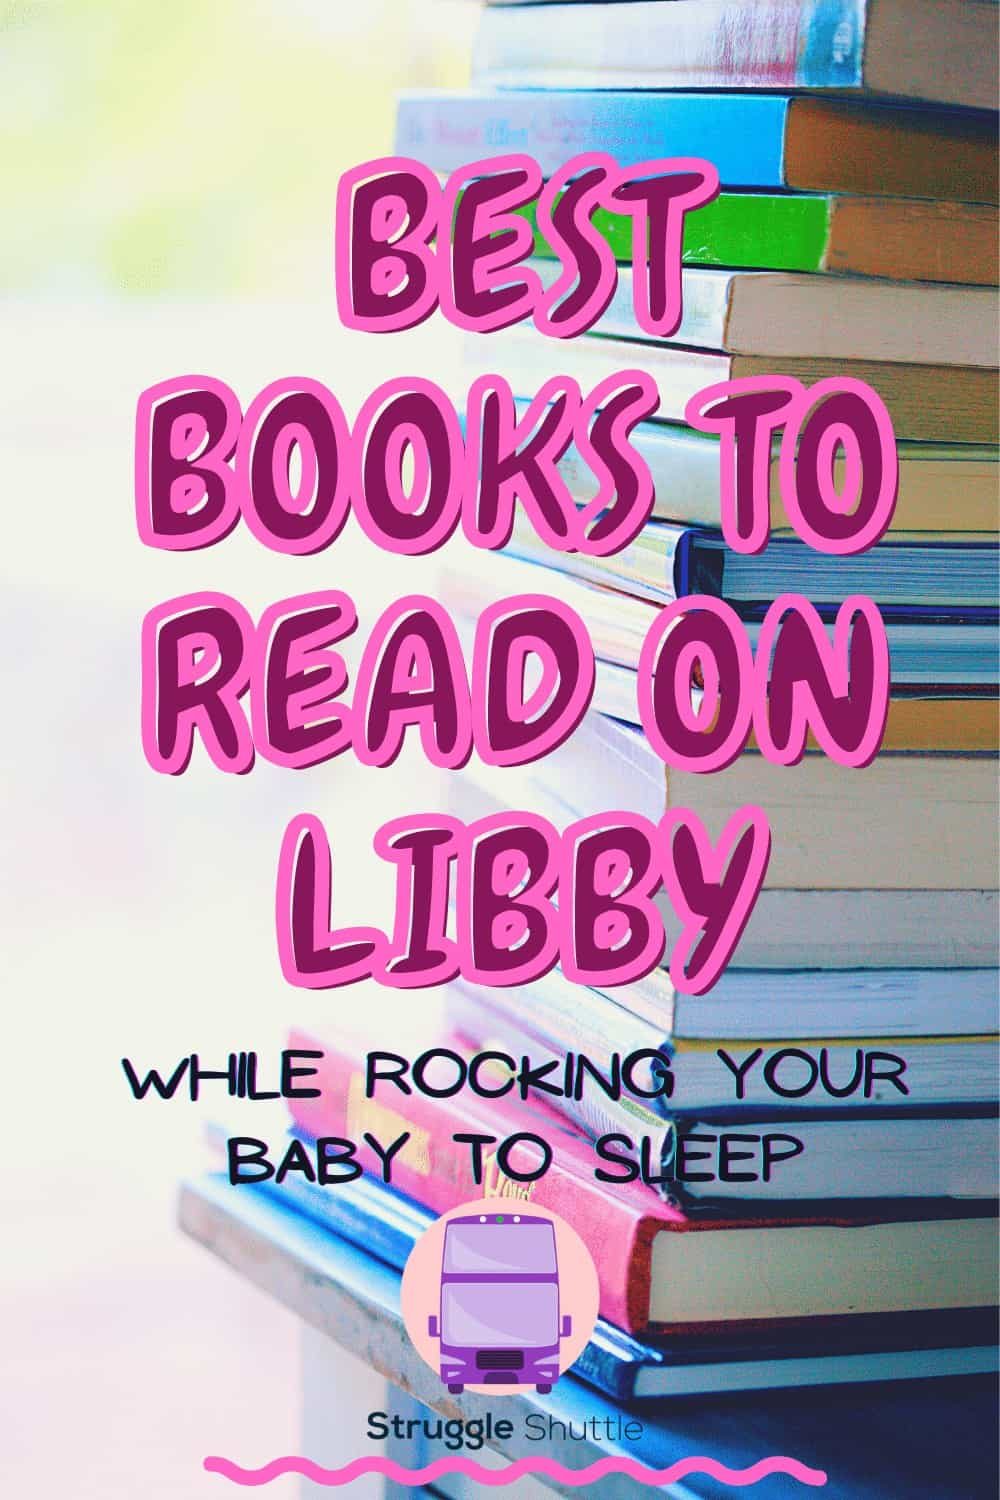 best books to read on libby